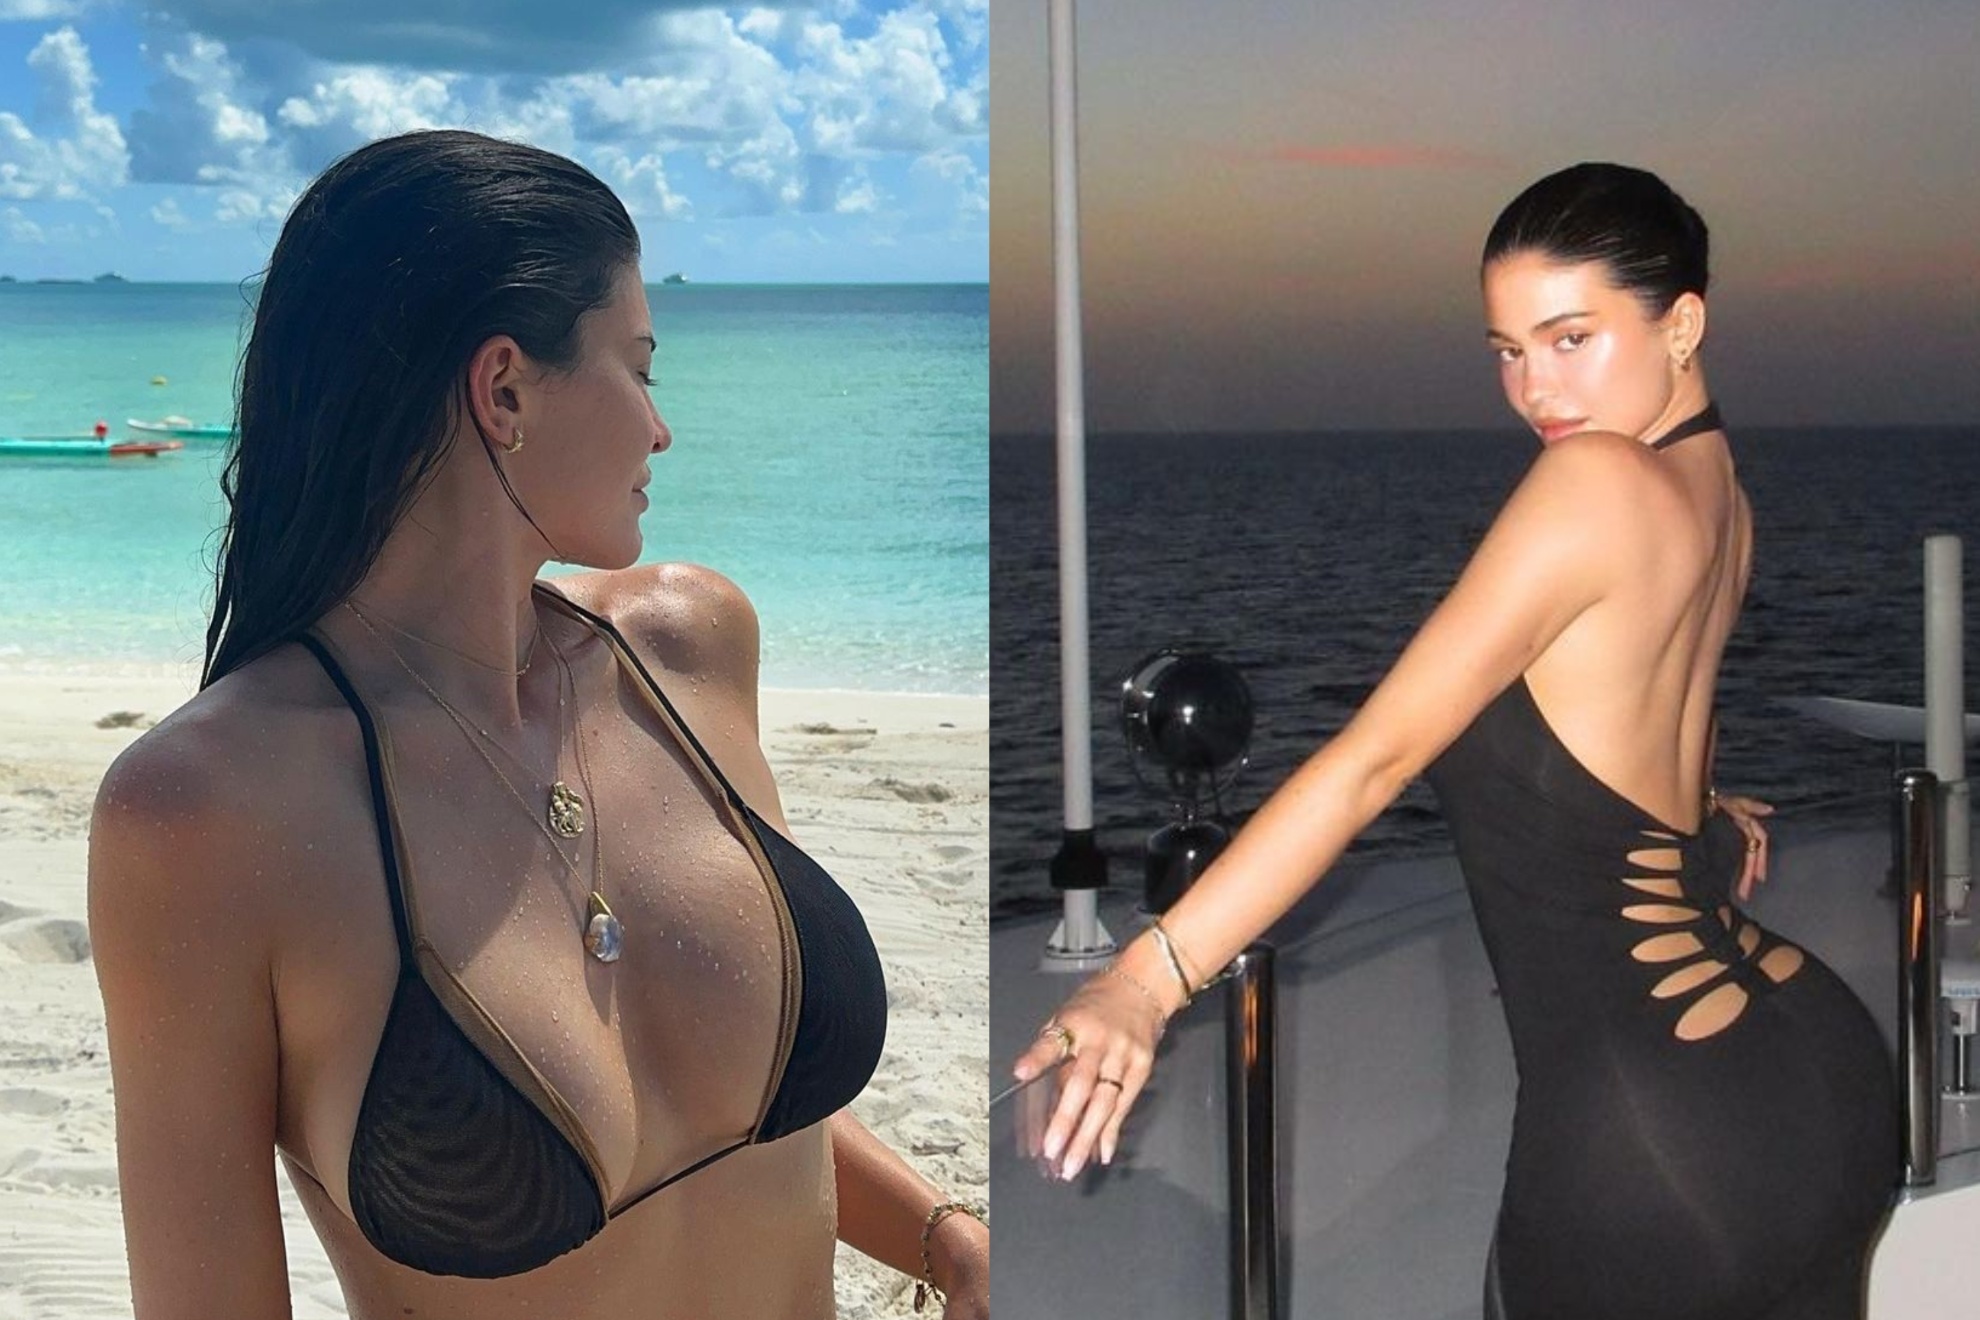 Kyle Jenner posted new bikini pics on Instagram to celebrate her 26th birthday